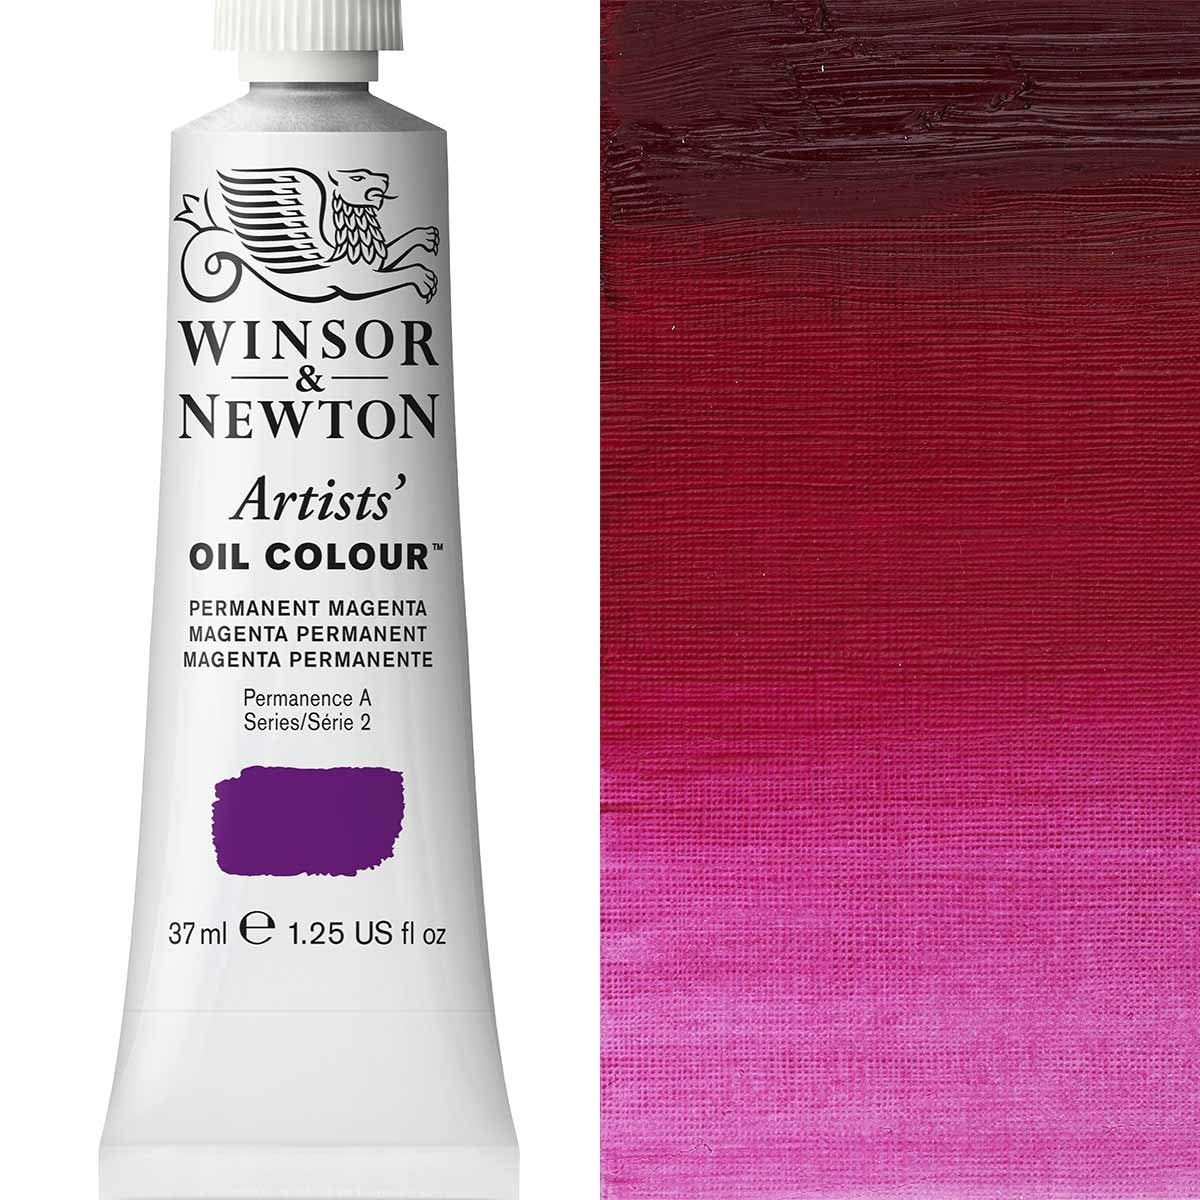 Winsor and Newton - Artists' Oil Colour - 37ml - Permanent Magenta